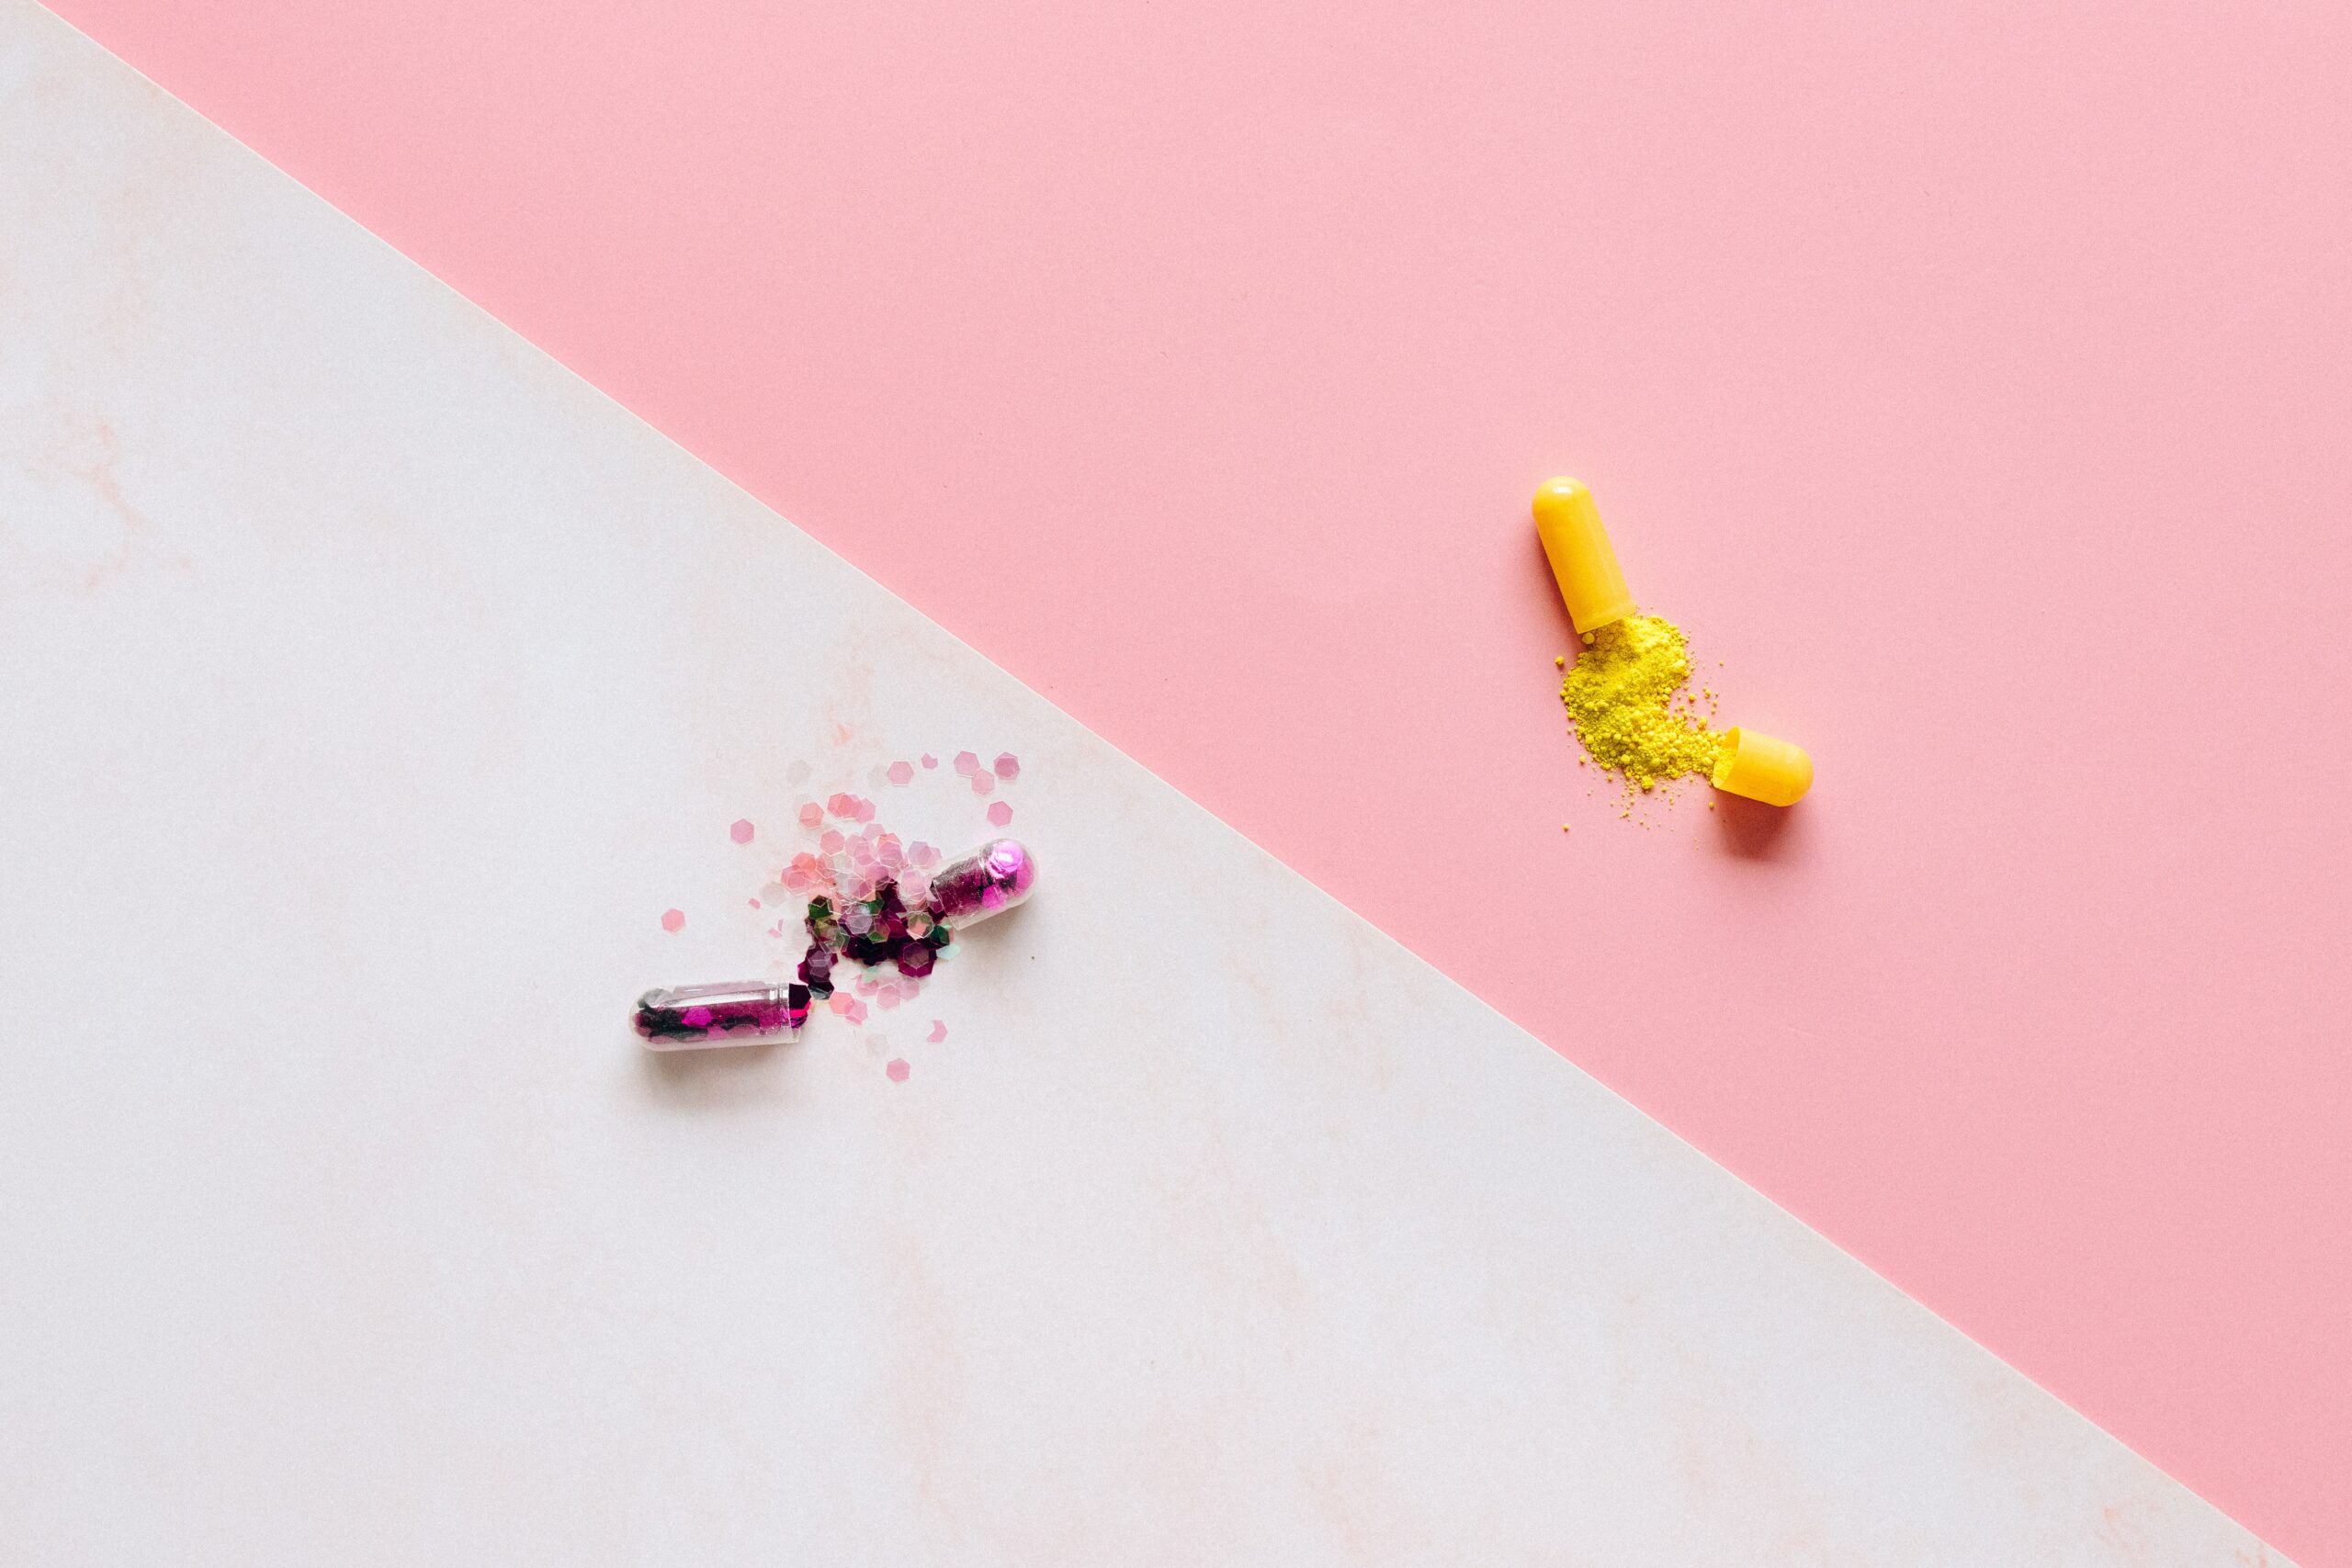 pink-pill-white-background-yellow-pill-pink-background